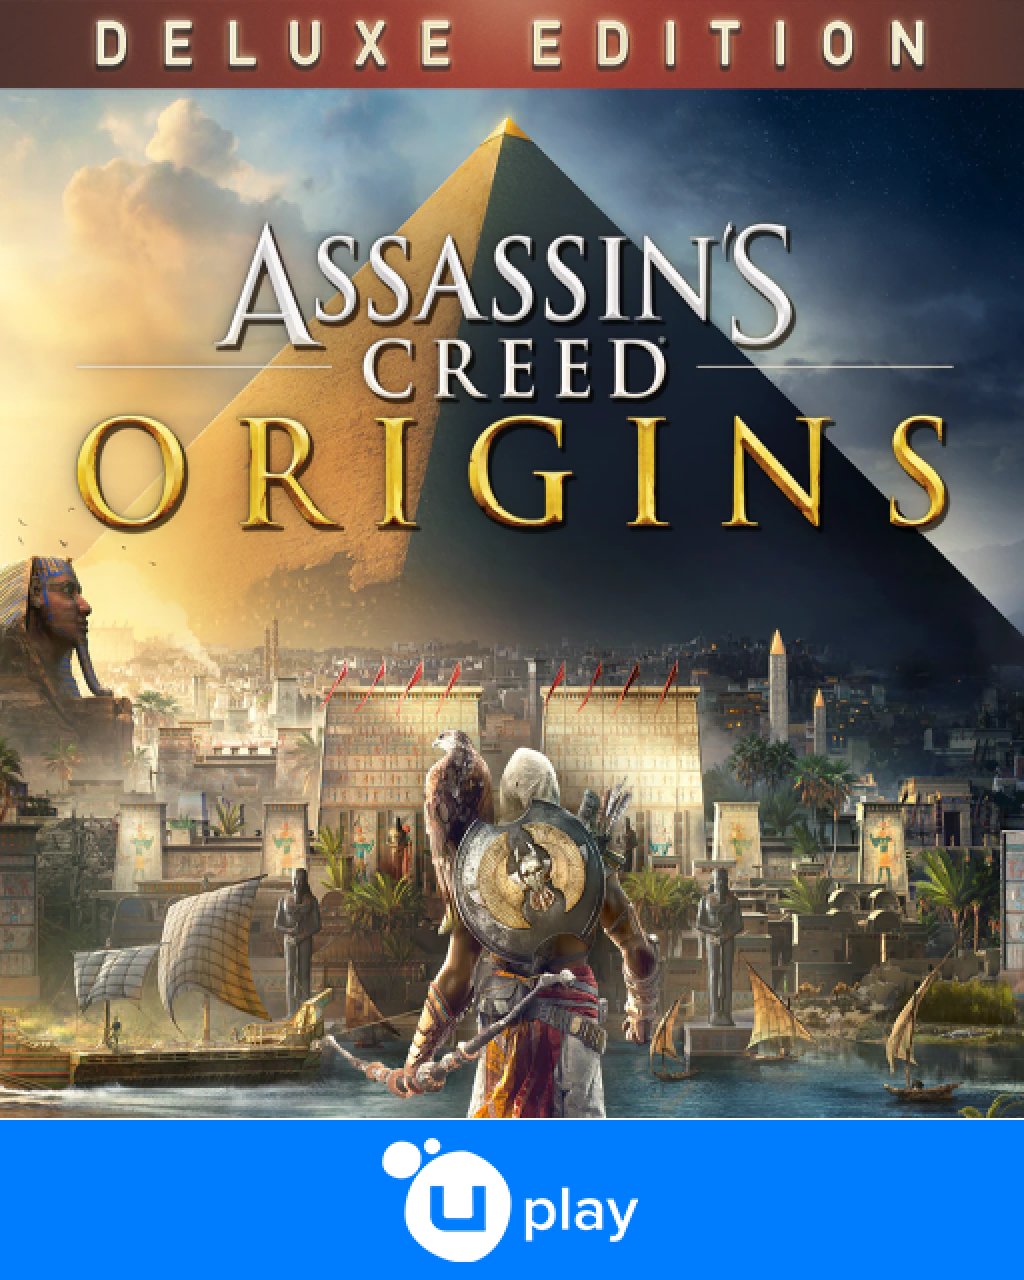 ESD Assassins Creed Origins Deluxe Edition